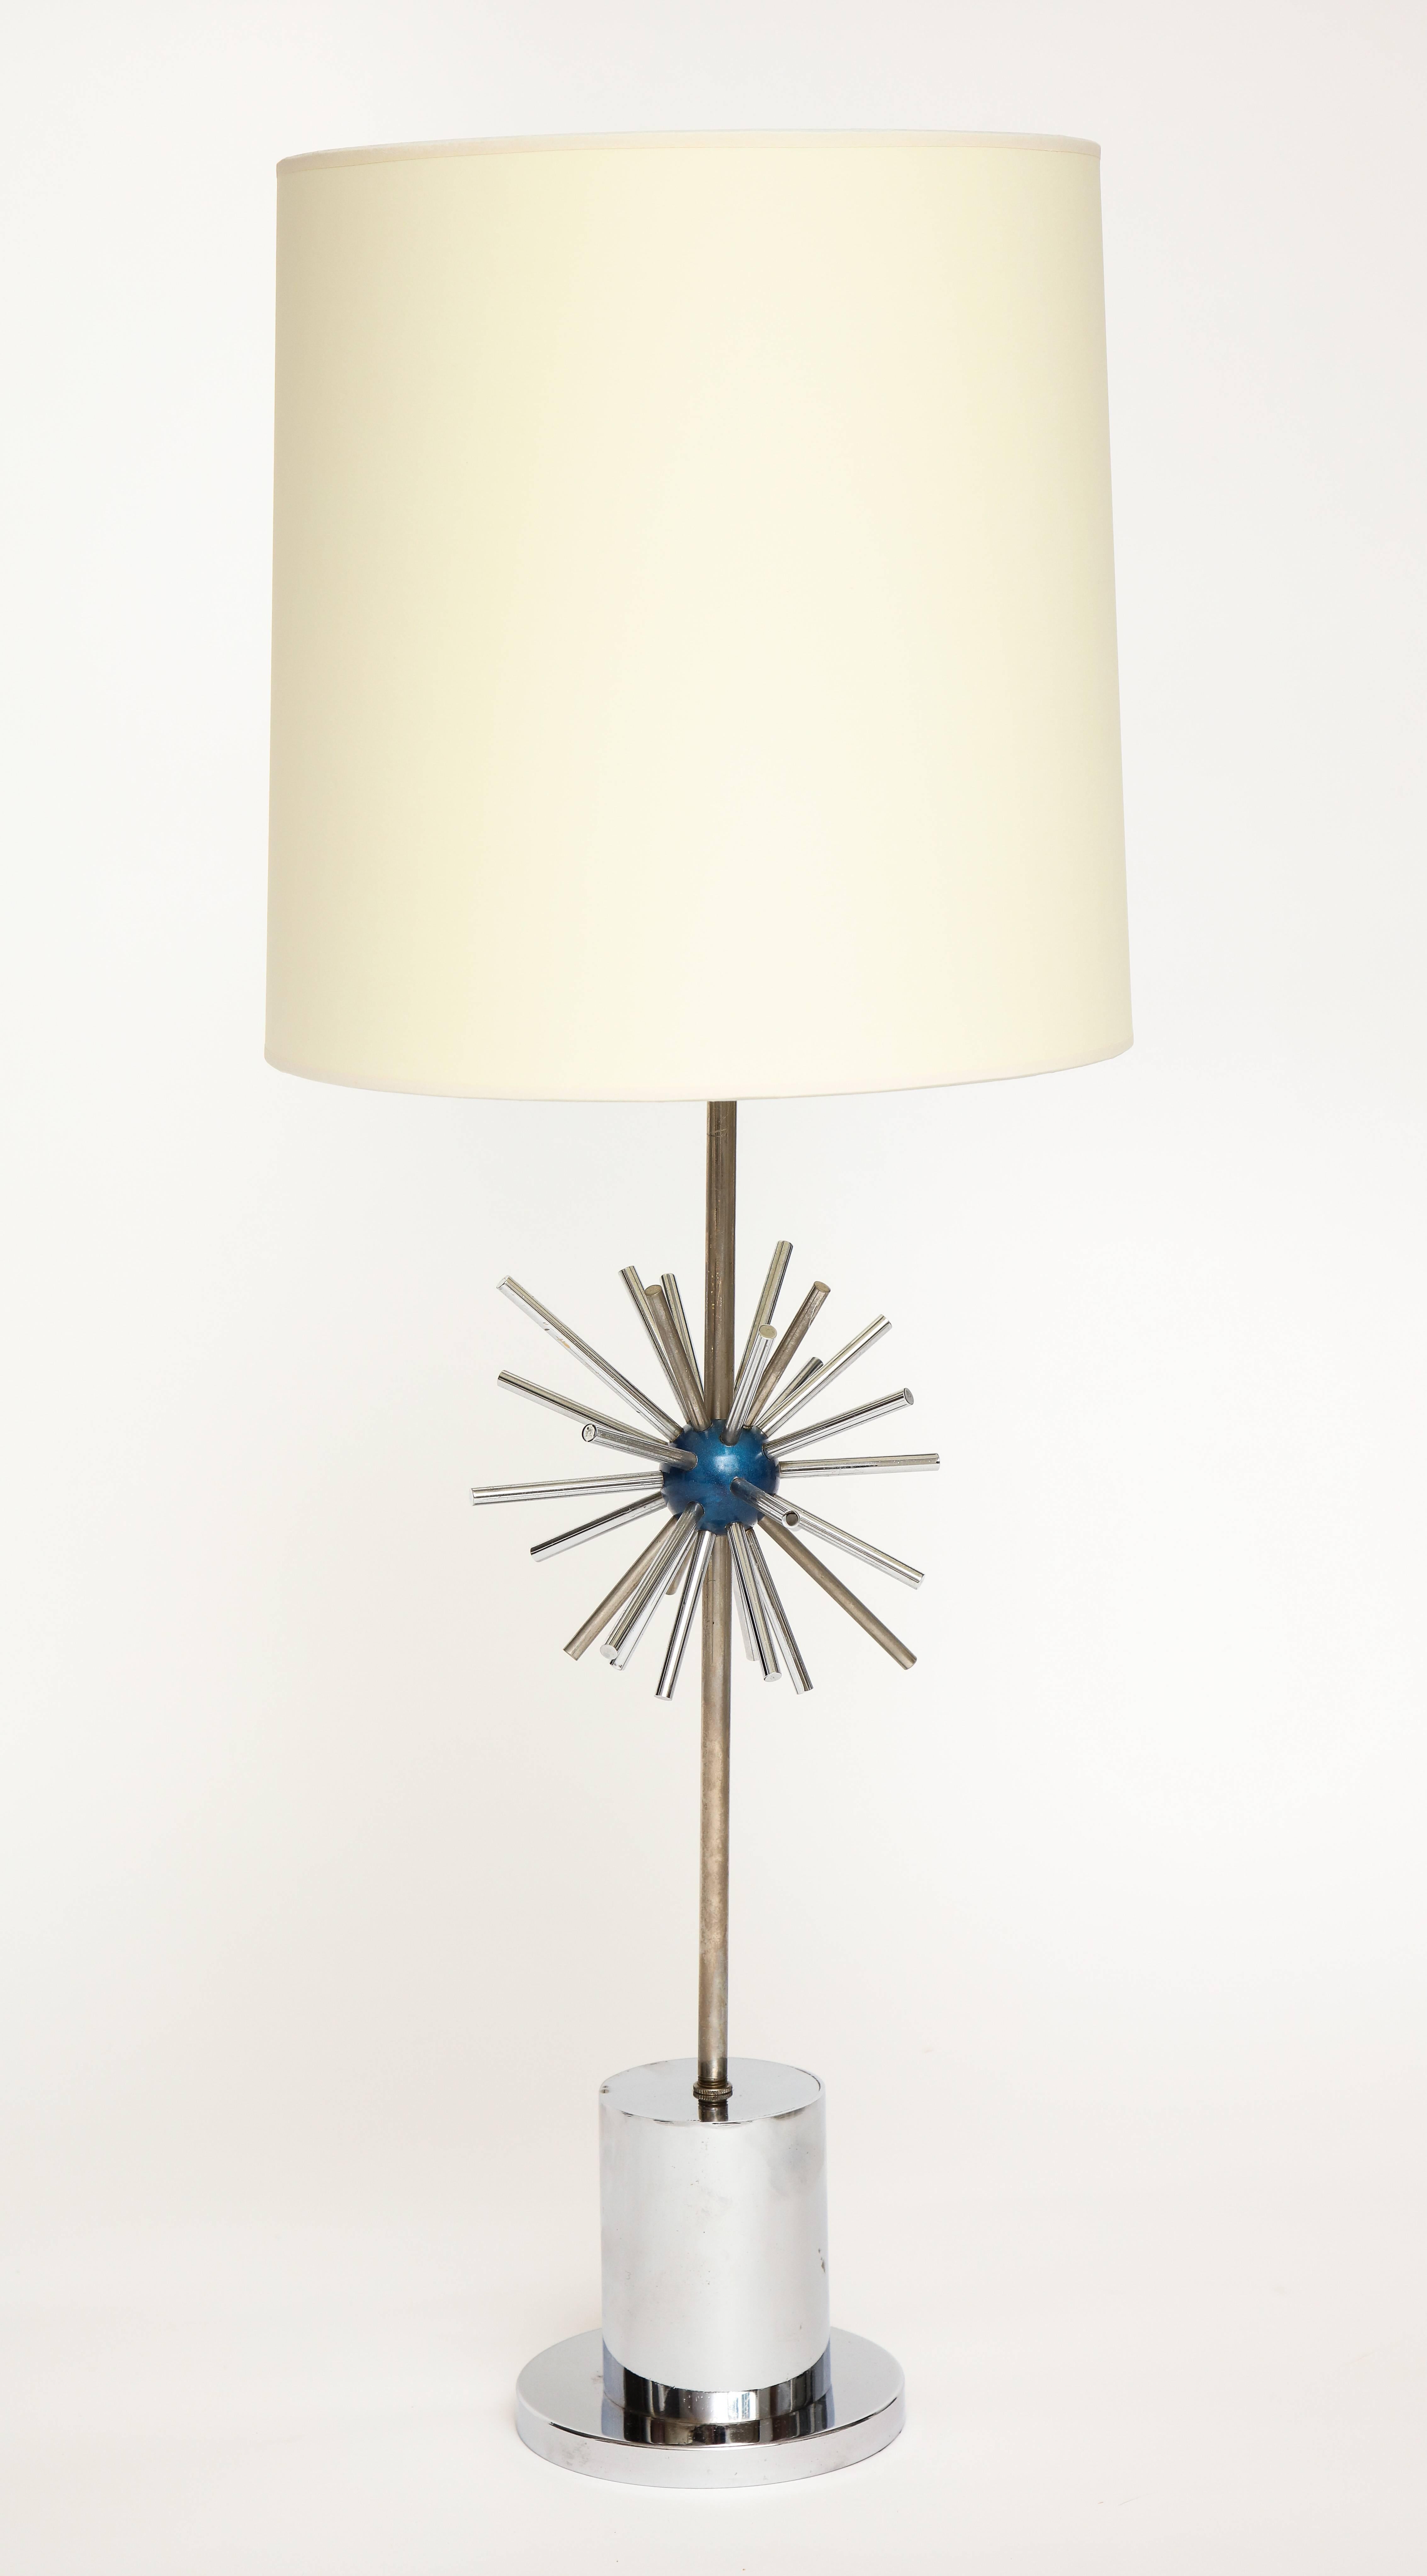 Chrome Desk Lamp with Lacquered Blue Sputnik Design, French, 1970s, Midcentury In Good Condition For Sale In New York, NY